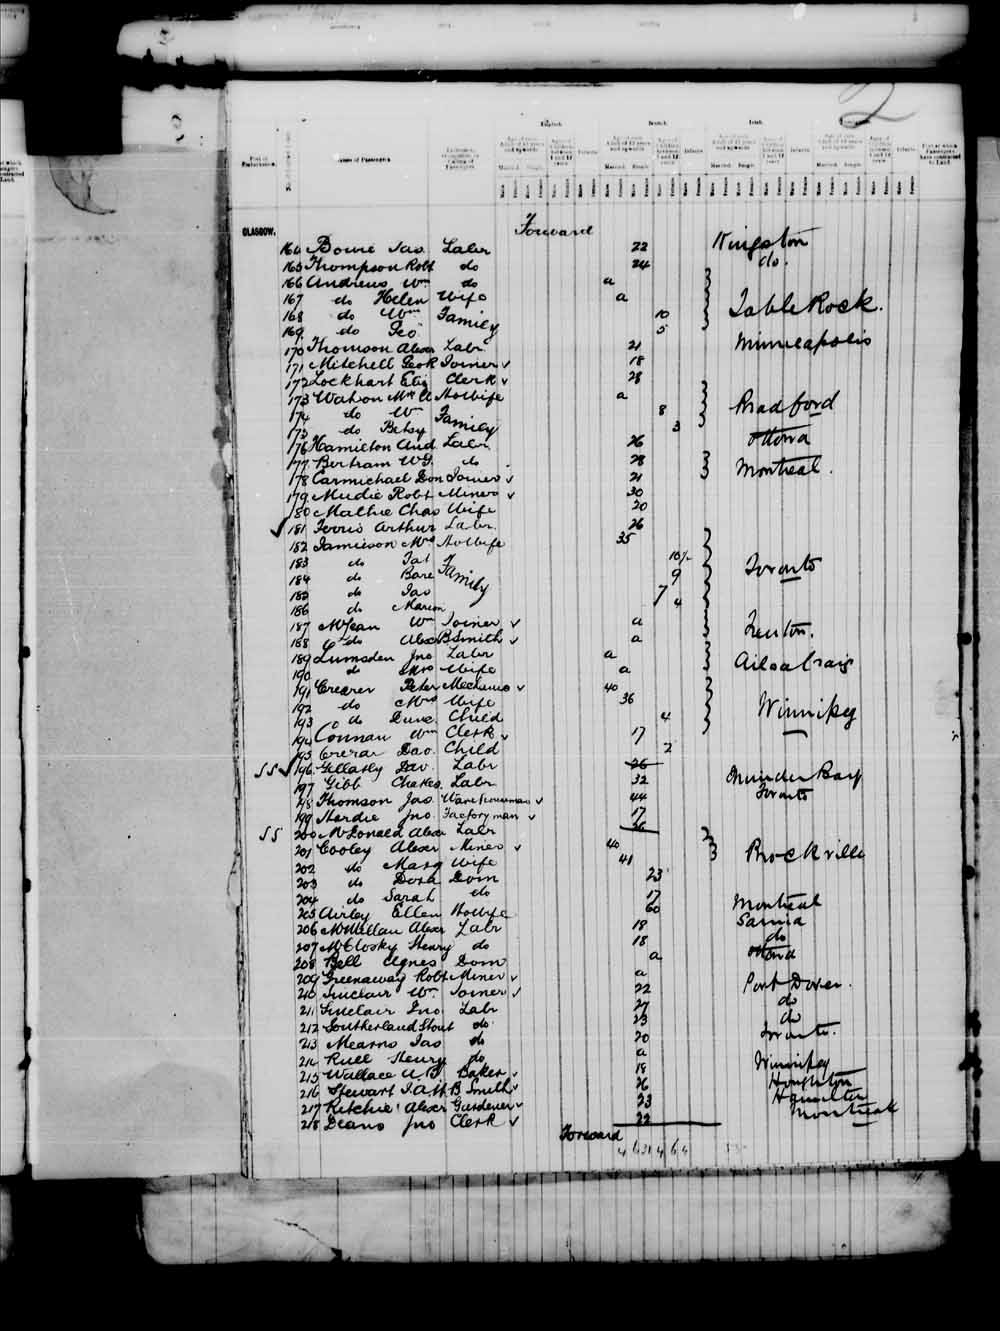 Digitized page of Passenger Lists for Image No.: e003542665